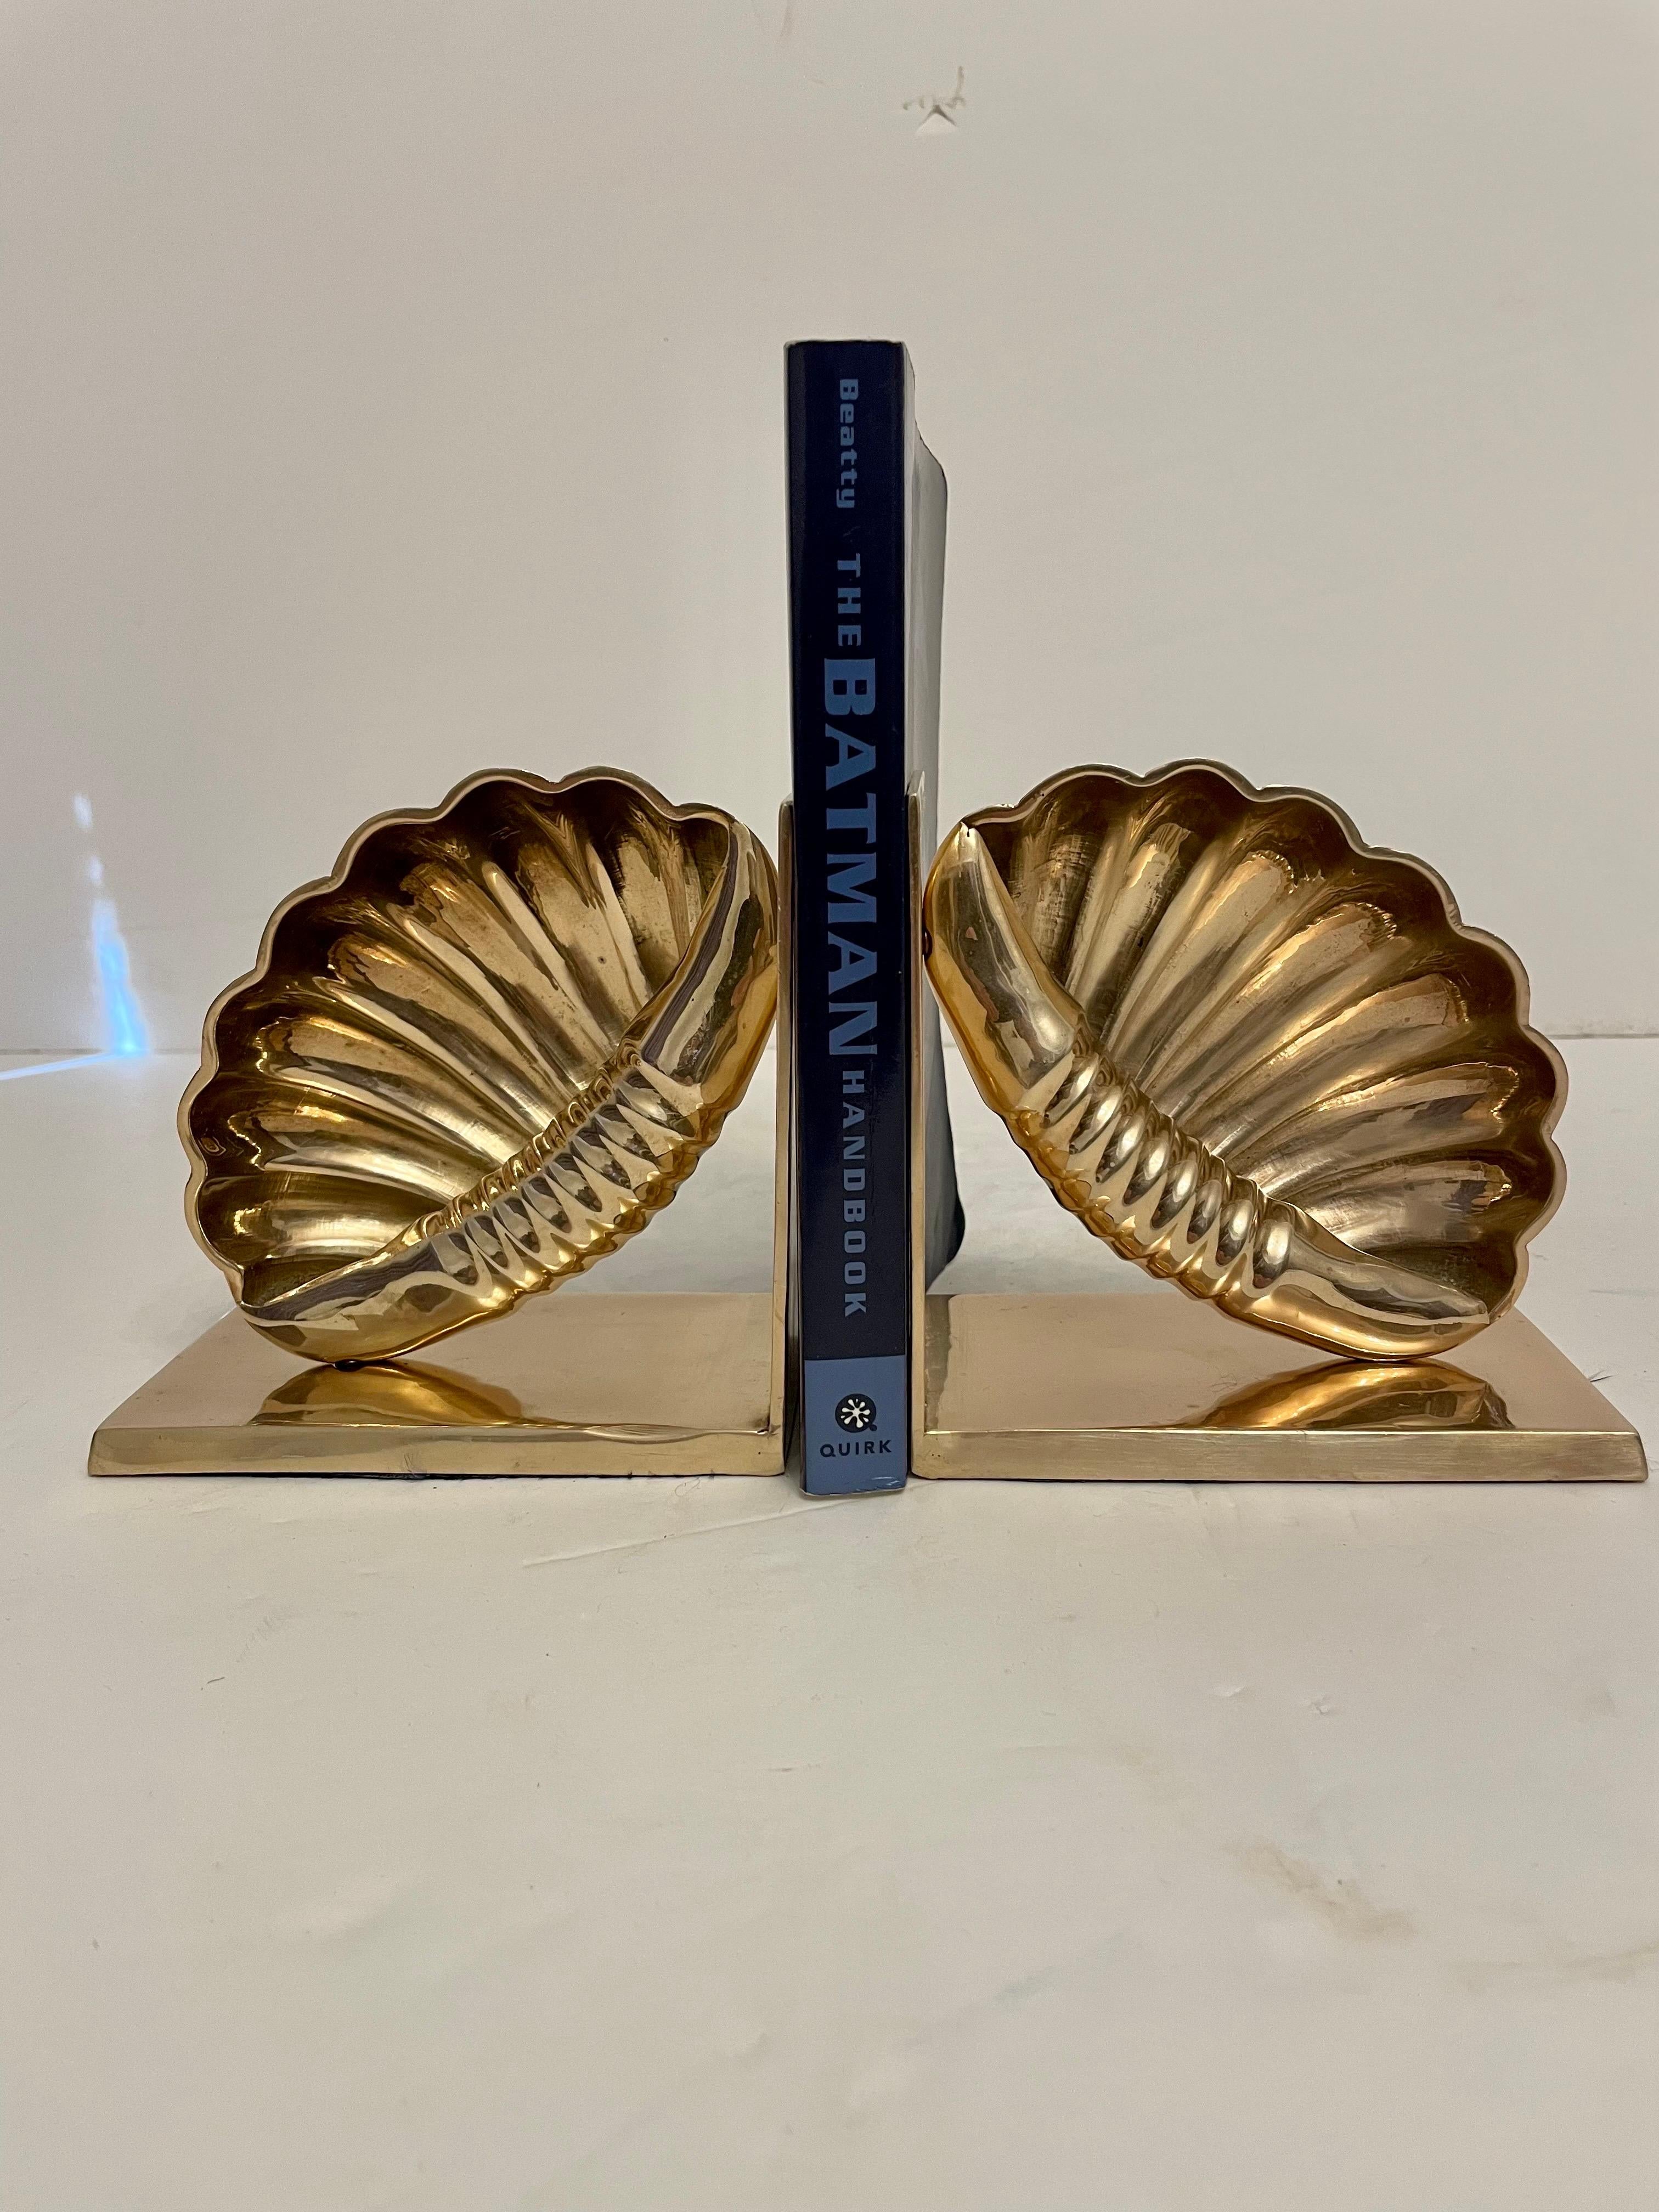 Brass nautical bookends. Nice detail in casting, heavy weight with substantial feel. Holds a shelves worth of books. Felt on bottoms as shown. Good condition, some light patina. Great for your beach house! 

Each bookend is 5” W x 5 H x 3” deep (10”